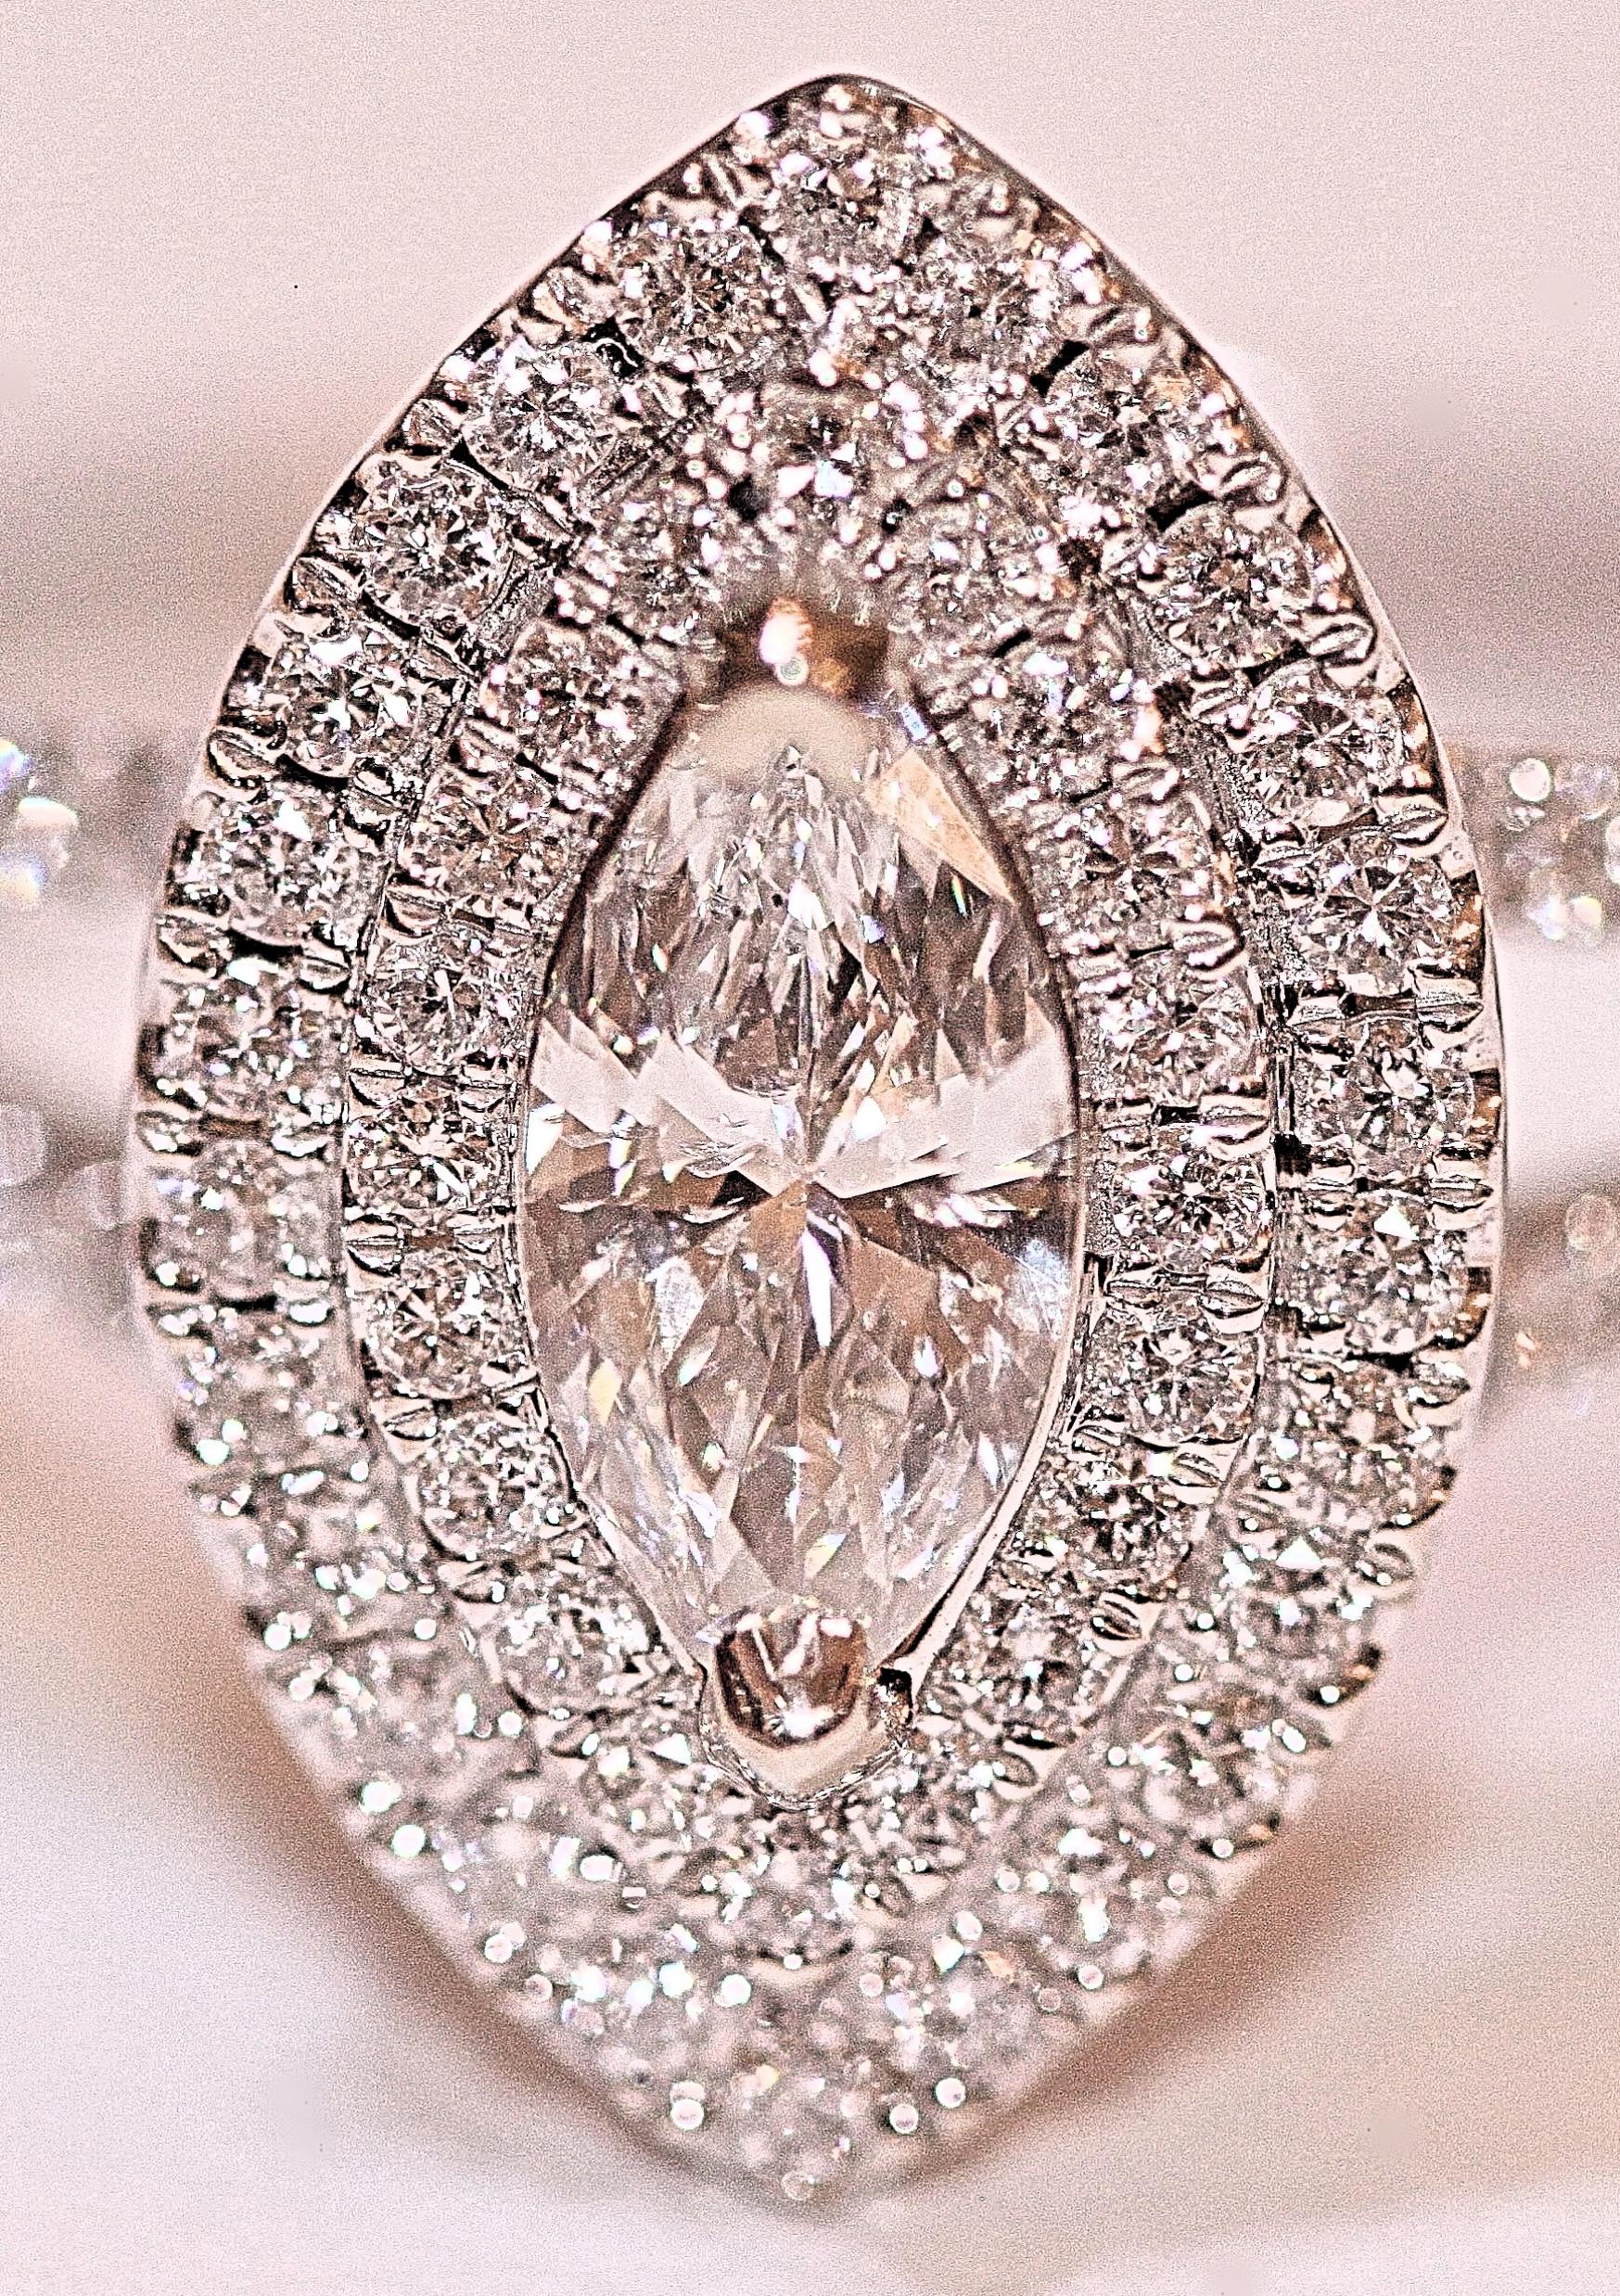 Beautiful marquise cut and round brilliant cut diamond ring.  The center marquise cut diamond weighs .39 carat total.  The marquise is an SI1 in clarity and F-G in color.  The ring is a two row halo design with a split shank.  The halo and split